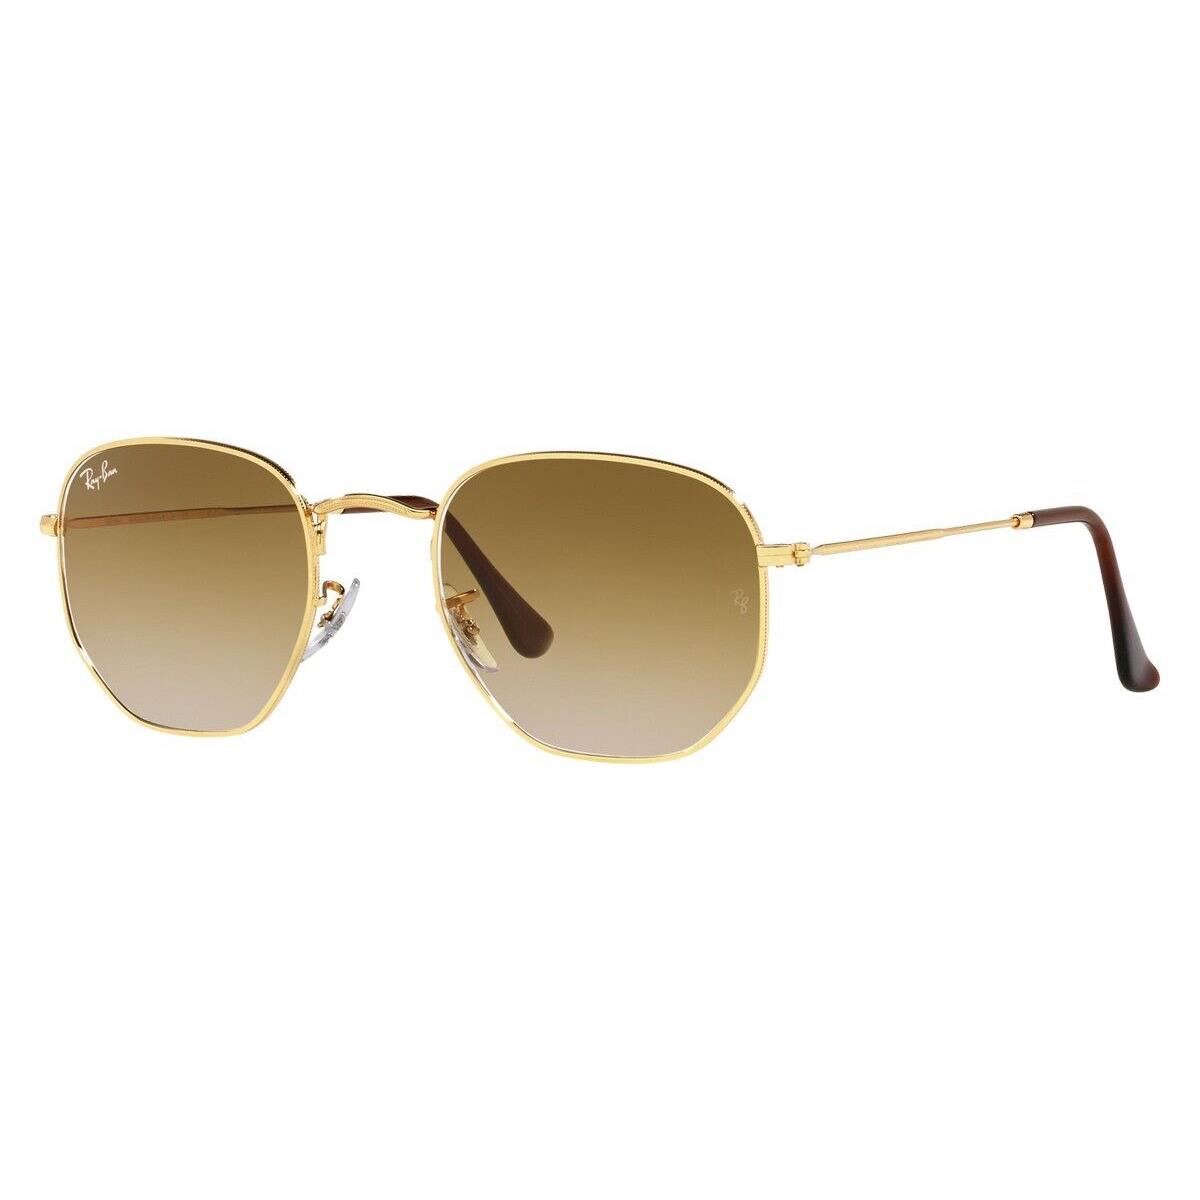 Ray-ban 0RB3548 Sunglasses Unisex Gold Geometric 51mm - Frame: Gold, Lens: Clear Gradient Brown, Model: